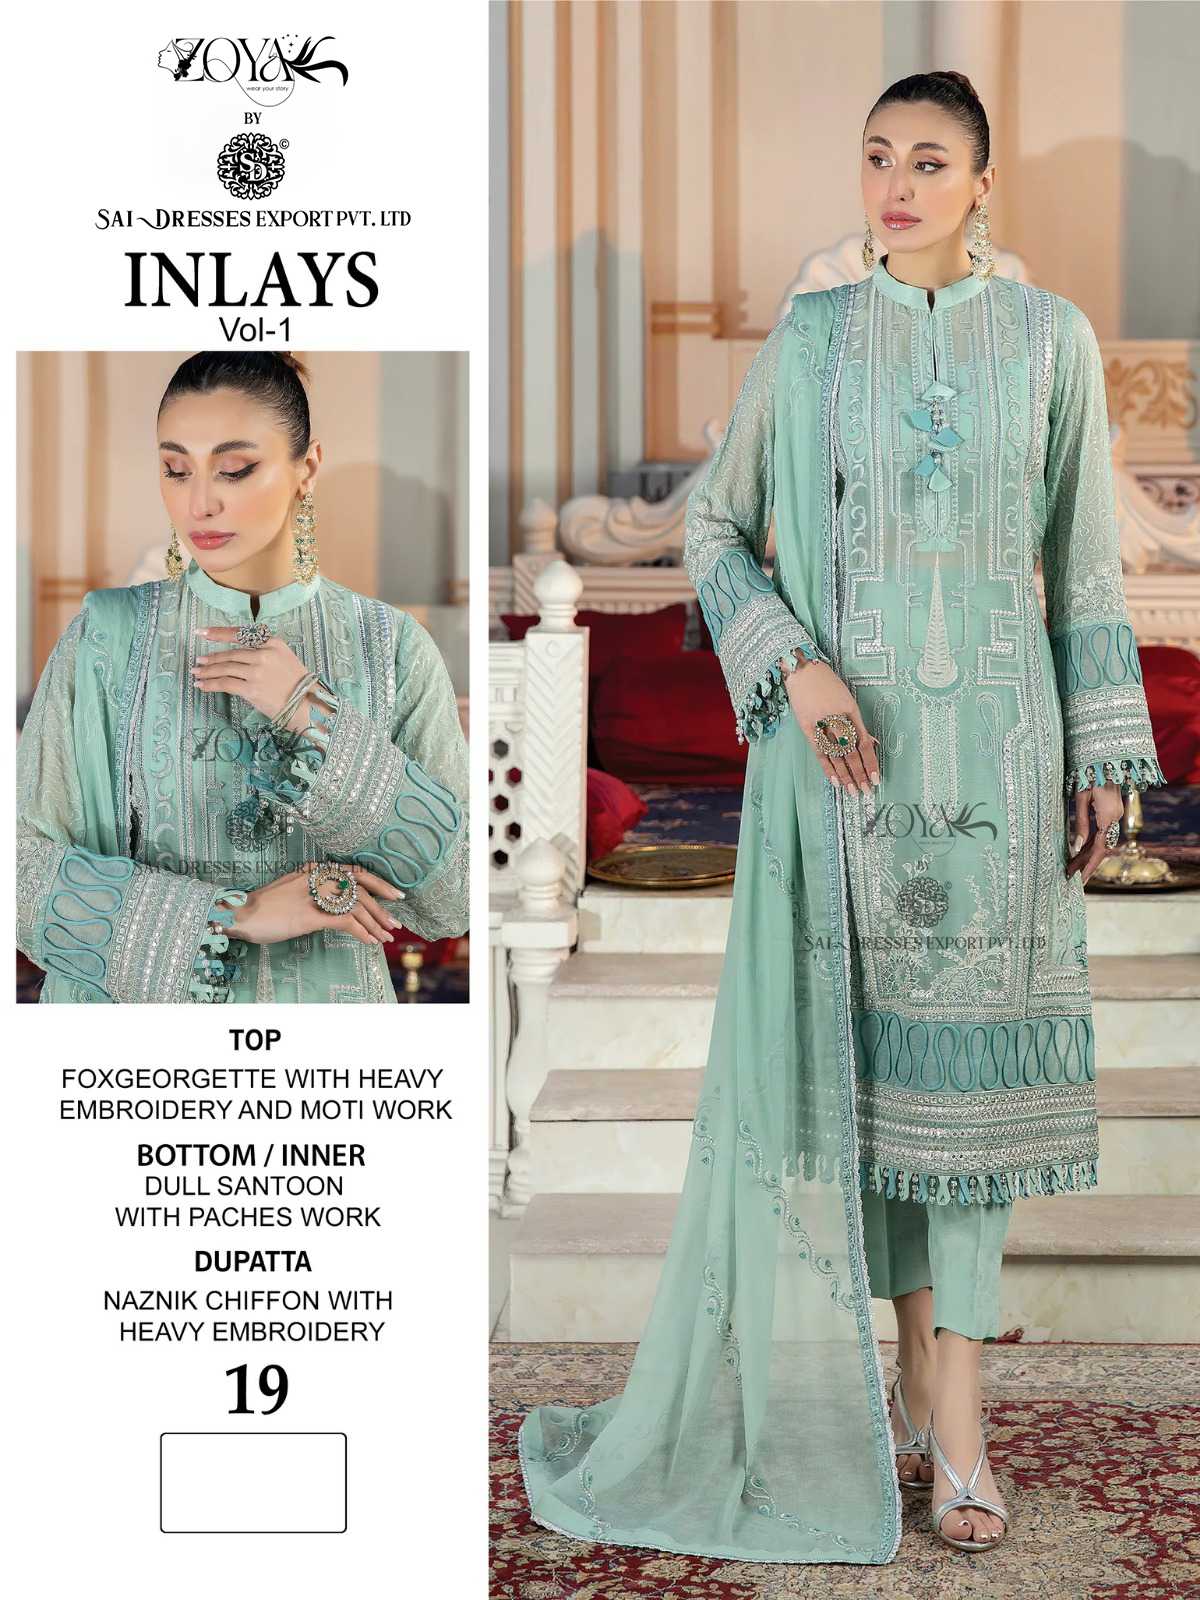 SAI DRESSES PRESENT INLAYS VOL 1 WEDDING WEAR SEMI STITCHED GEORGETTE PAKISTANI SUITS IN WHOLESALE RATE IN SURAT